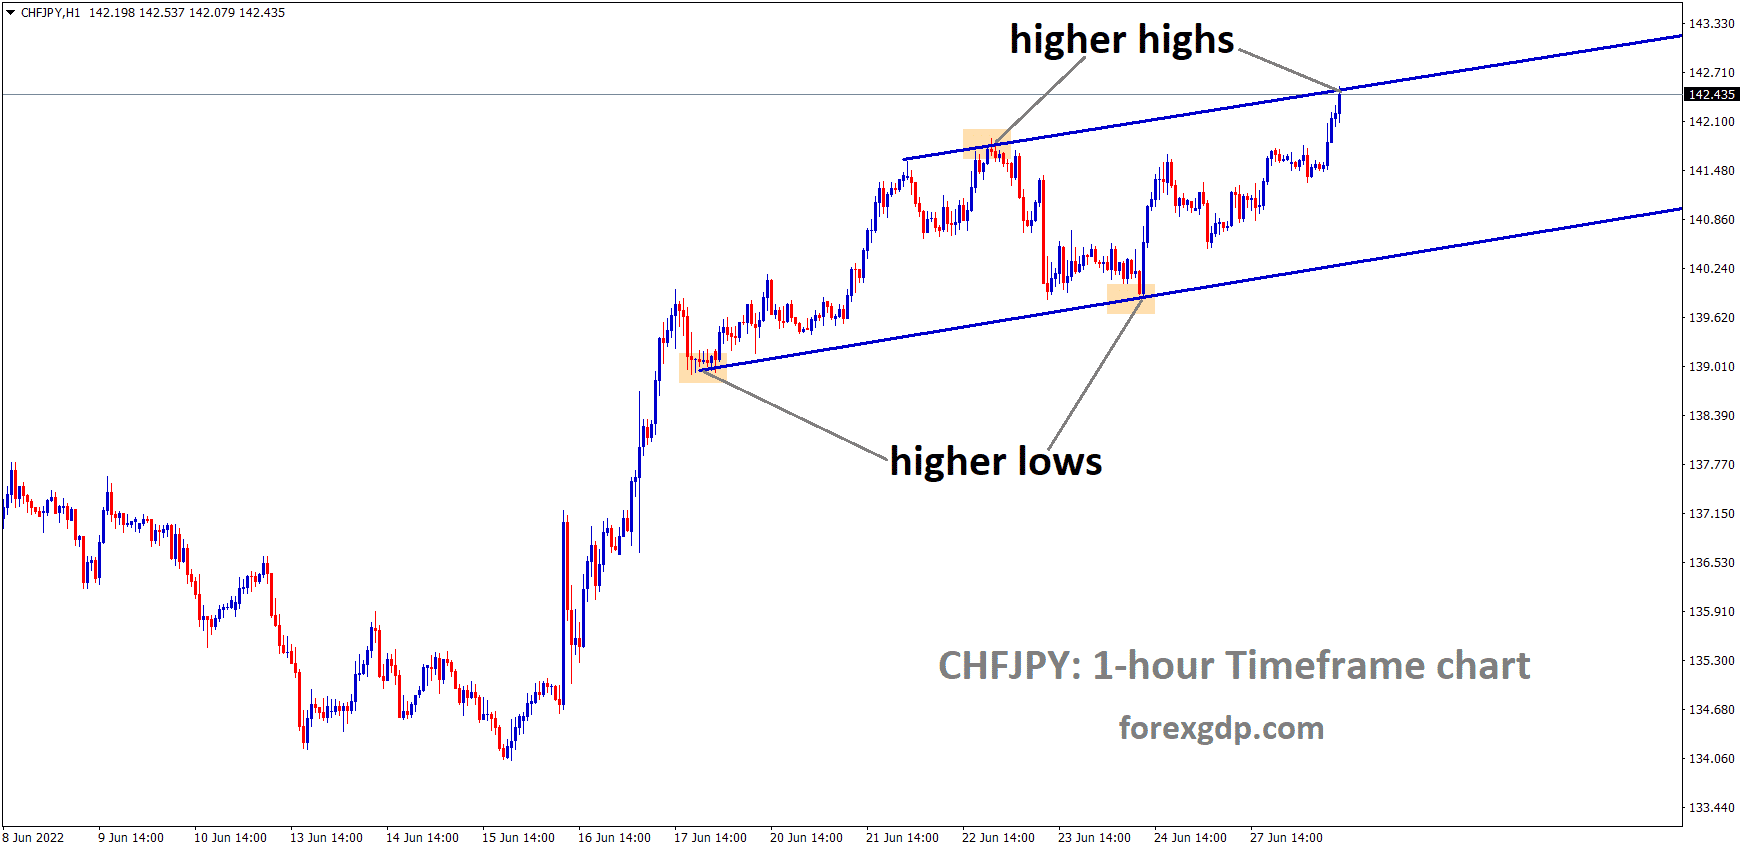 CHFJPY is moving in an Ascending channel and the Market has reached the higher high area of the channel